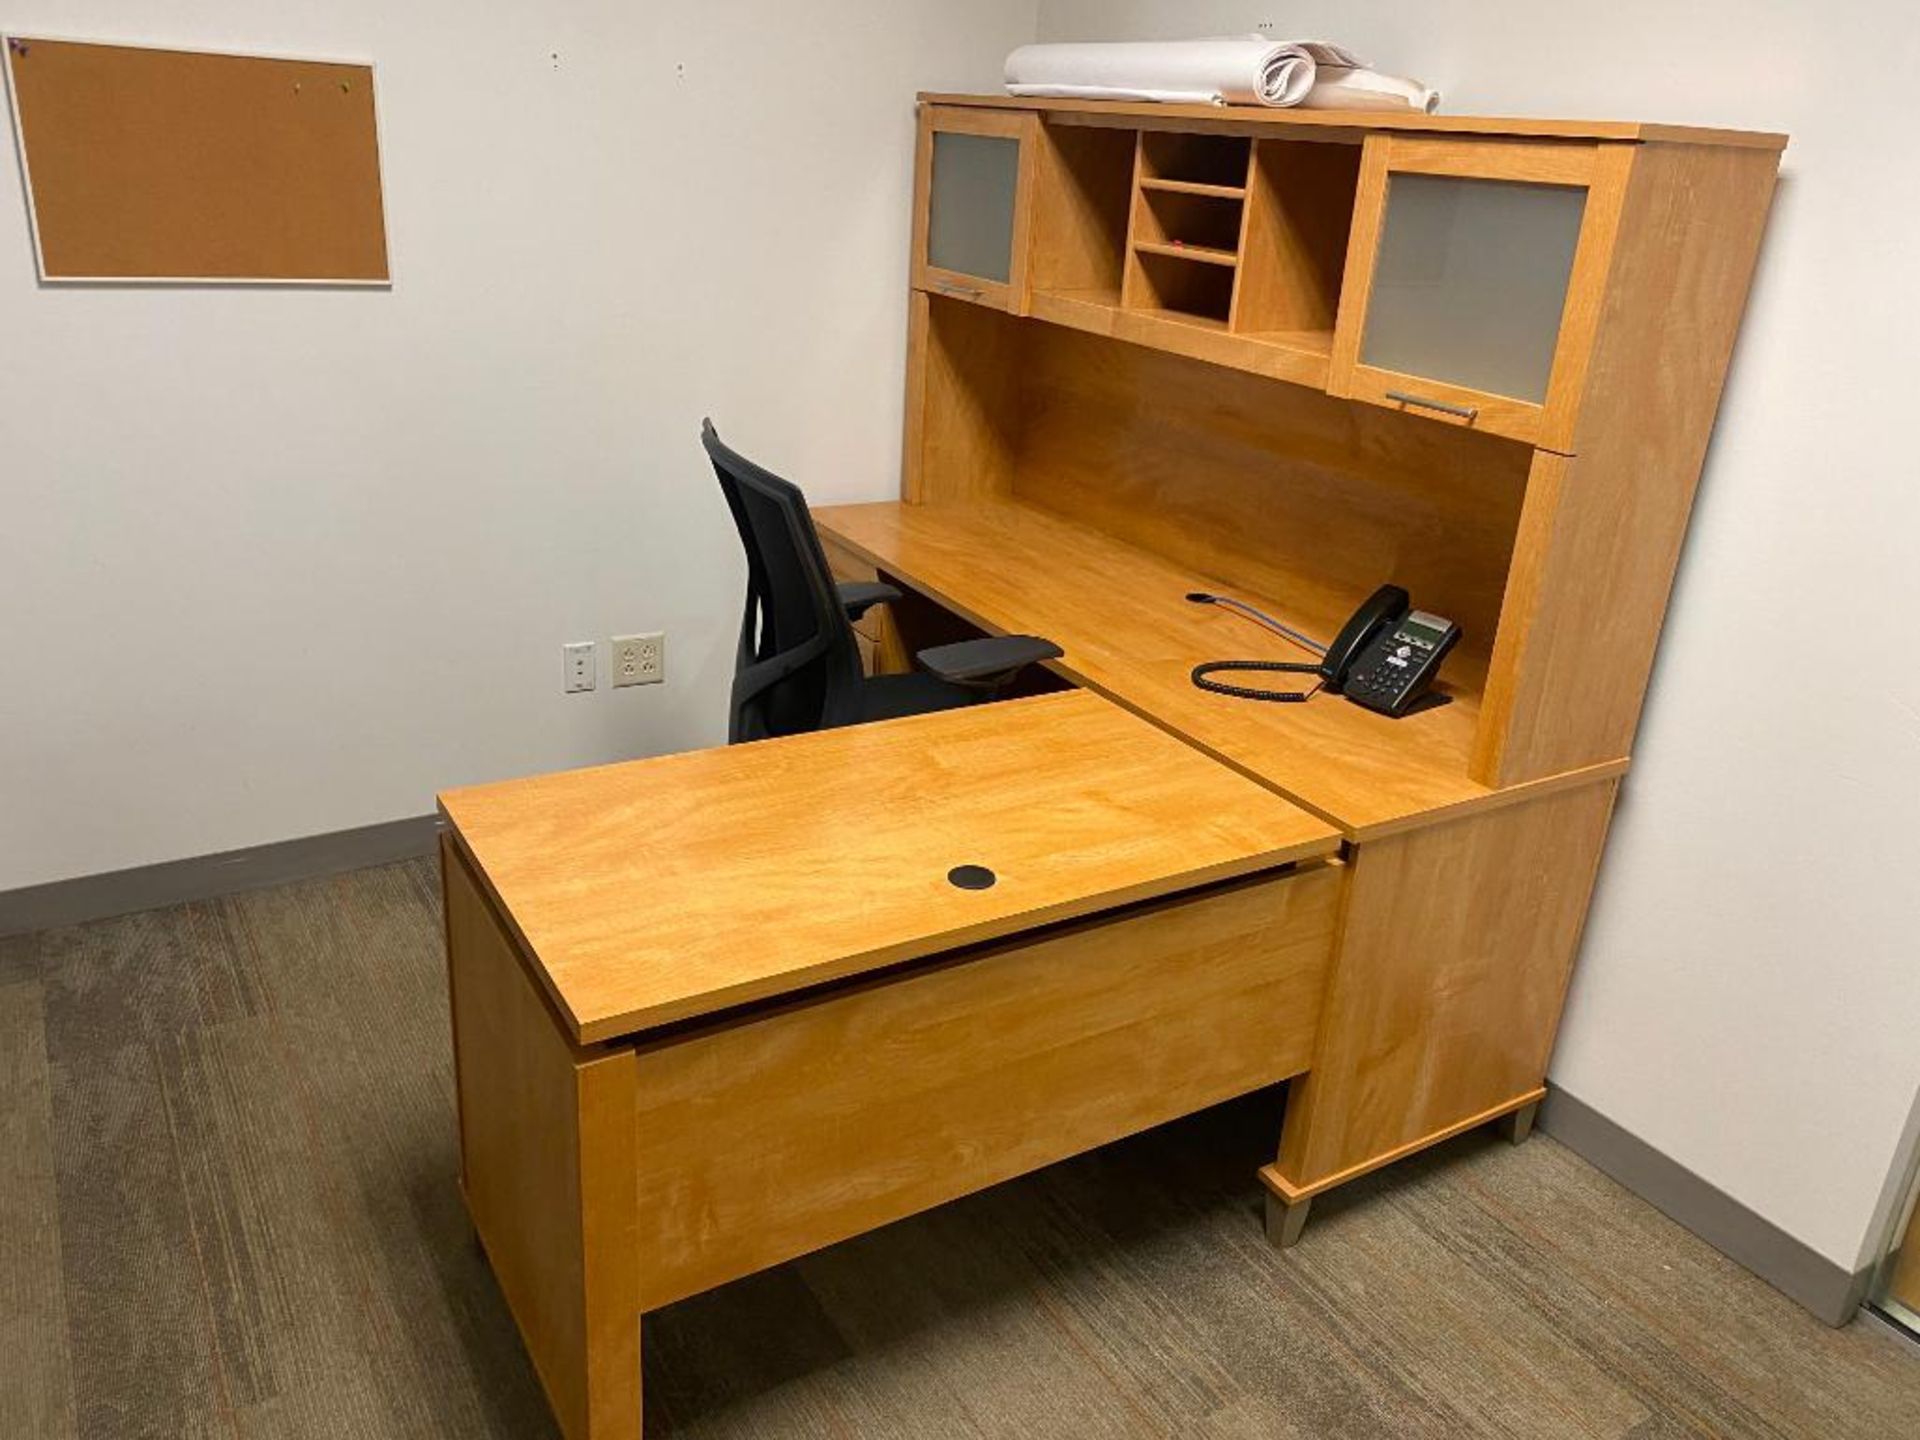 Content of Office Desk, Cabinets, & Chair